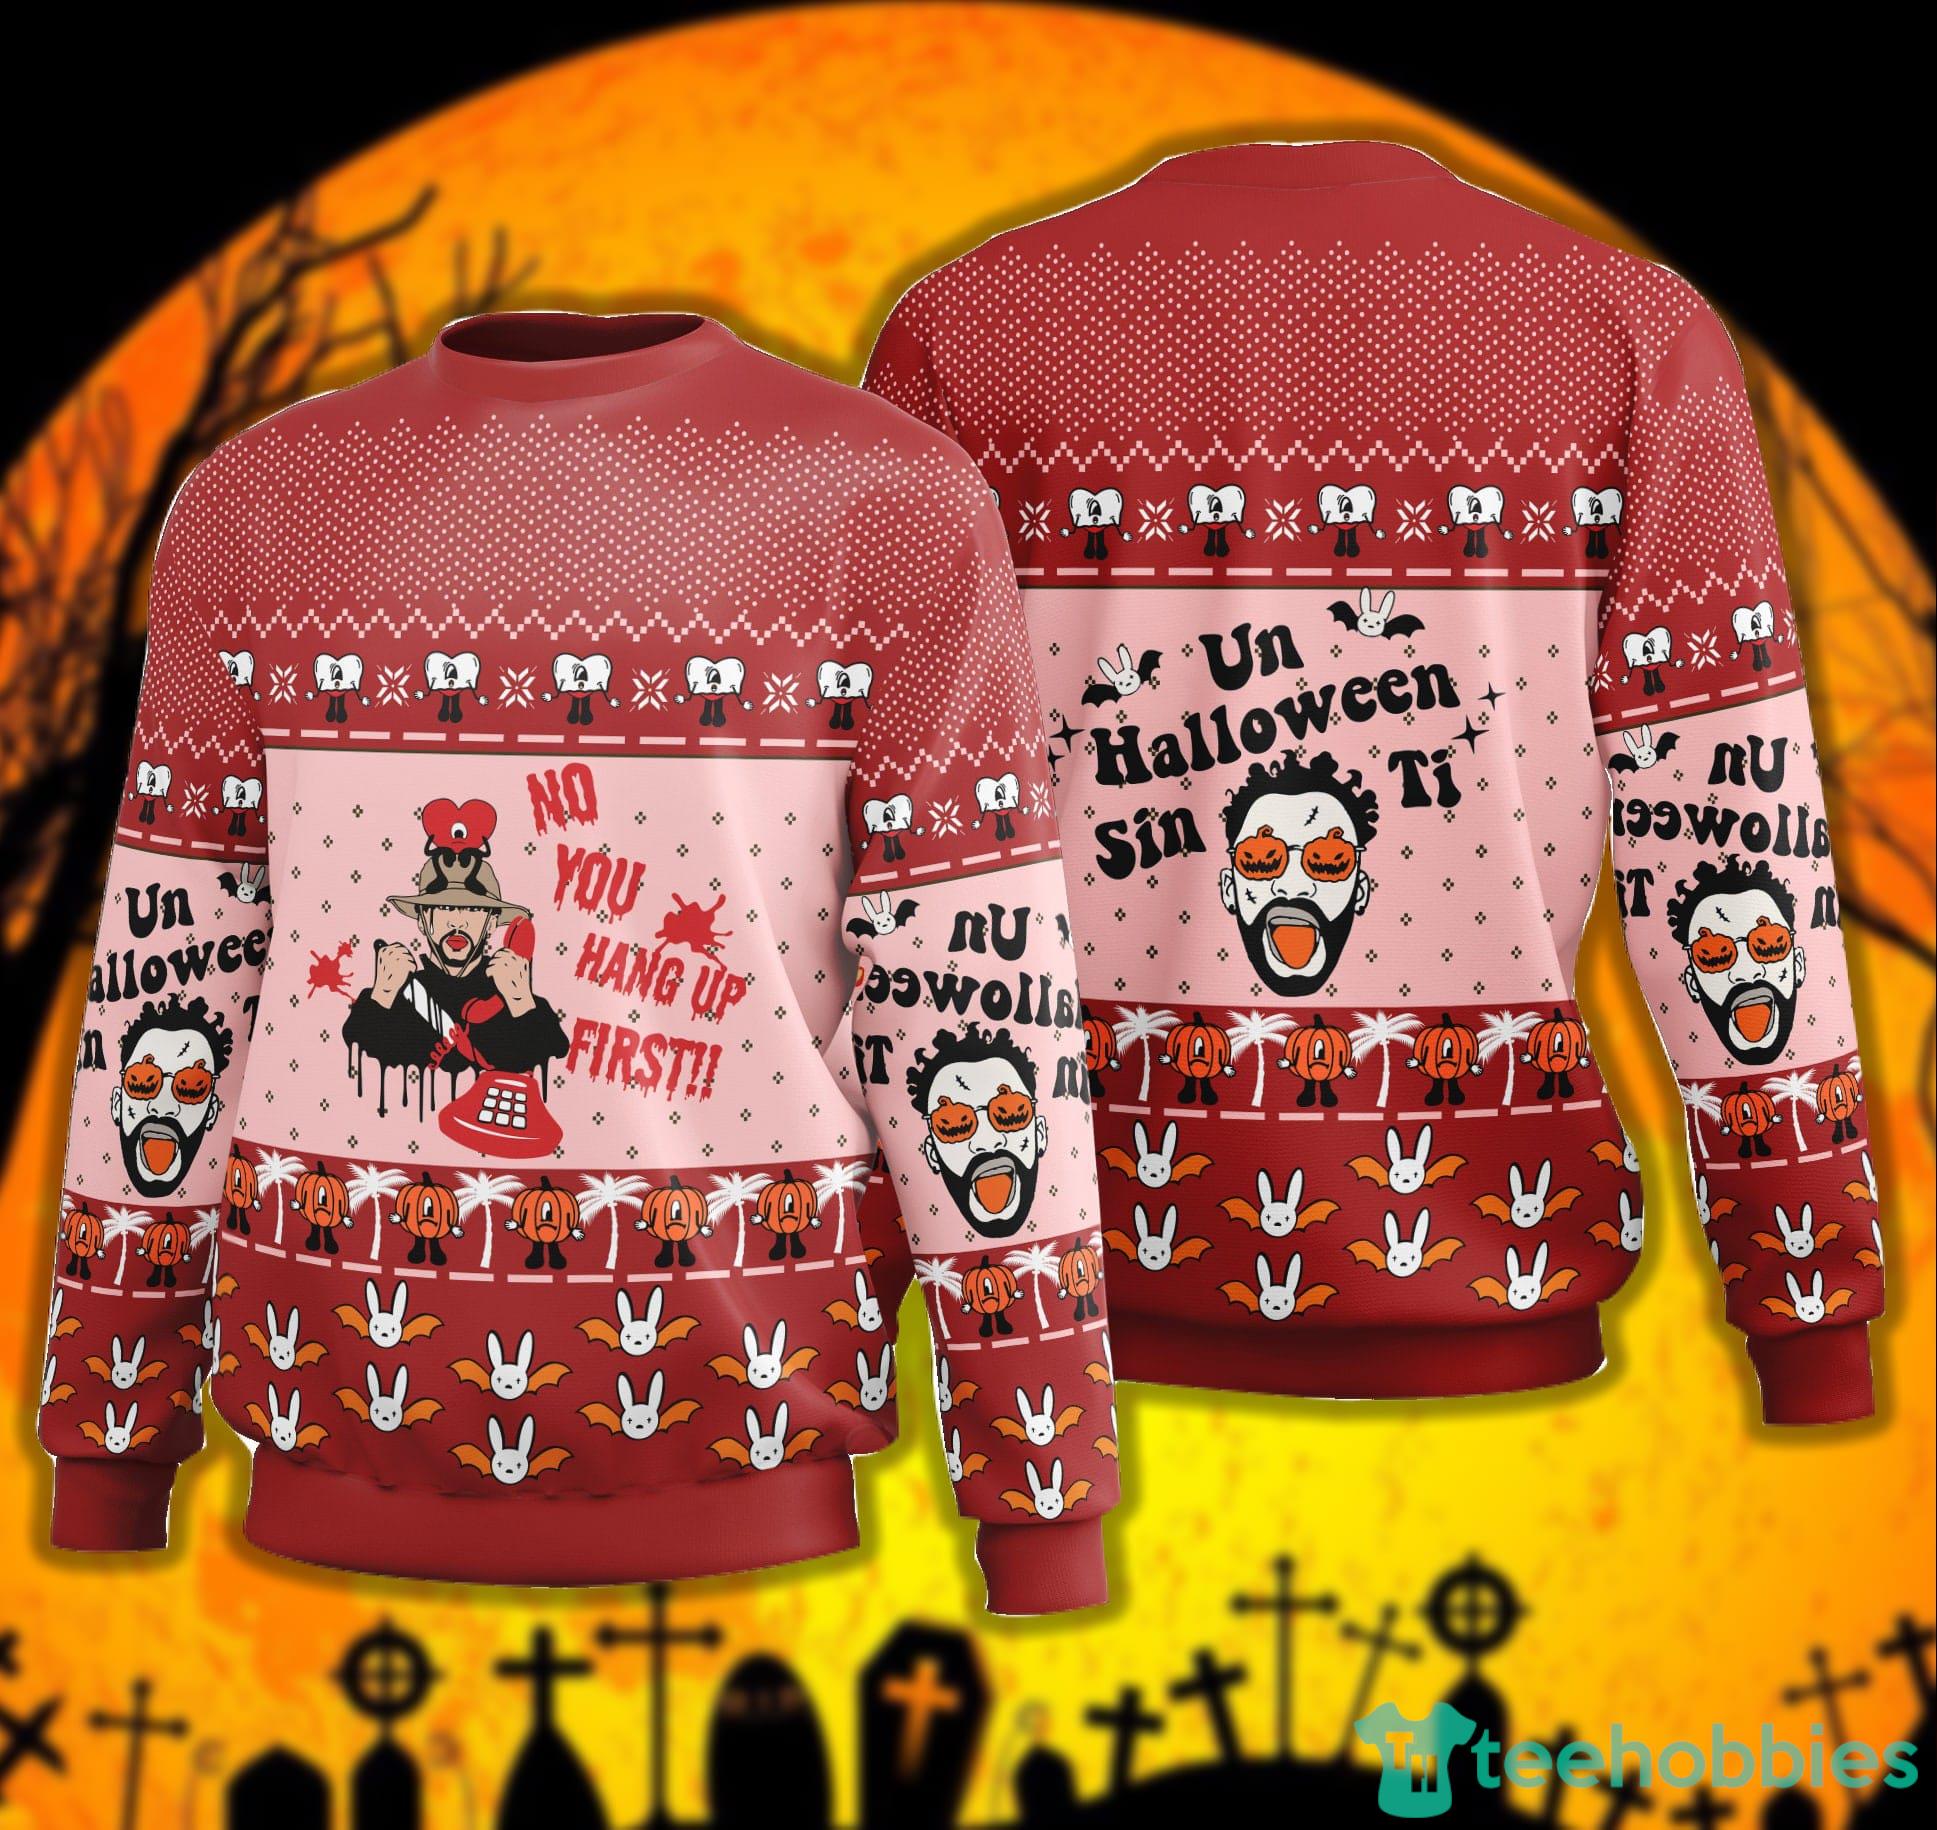 No you Hang Up First Halloween Sweater Un Halloween Sin Ti Sweater Bad Bunny Verano Sin Ti Sweater Product Photo 1